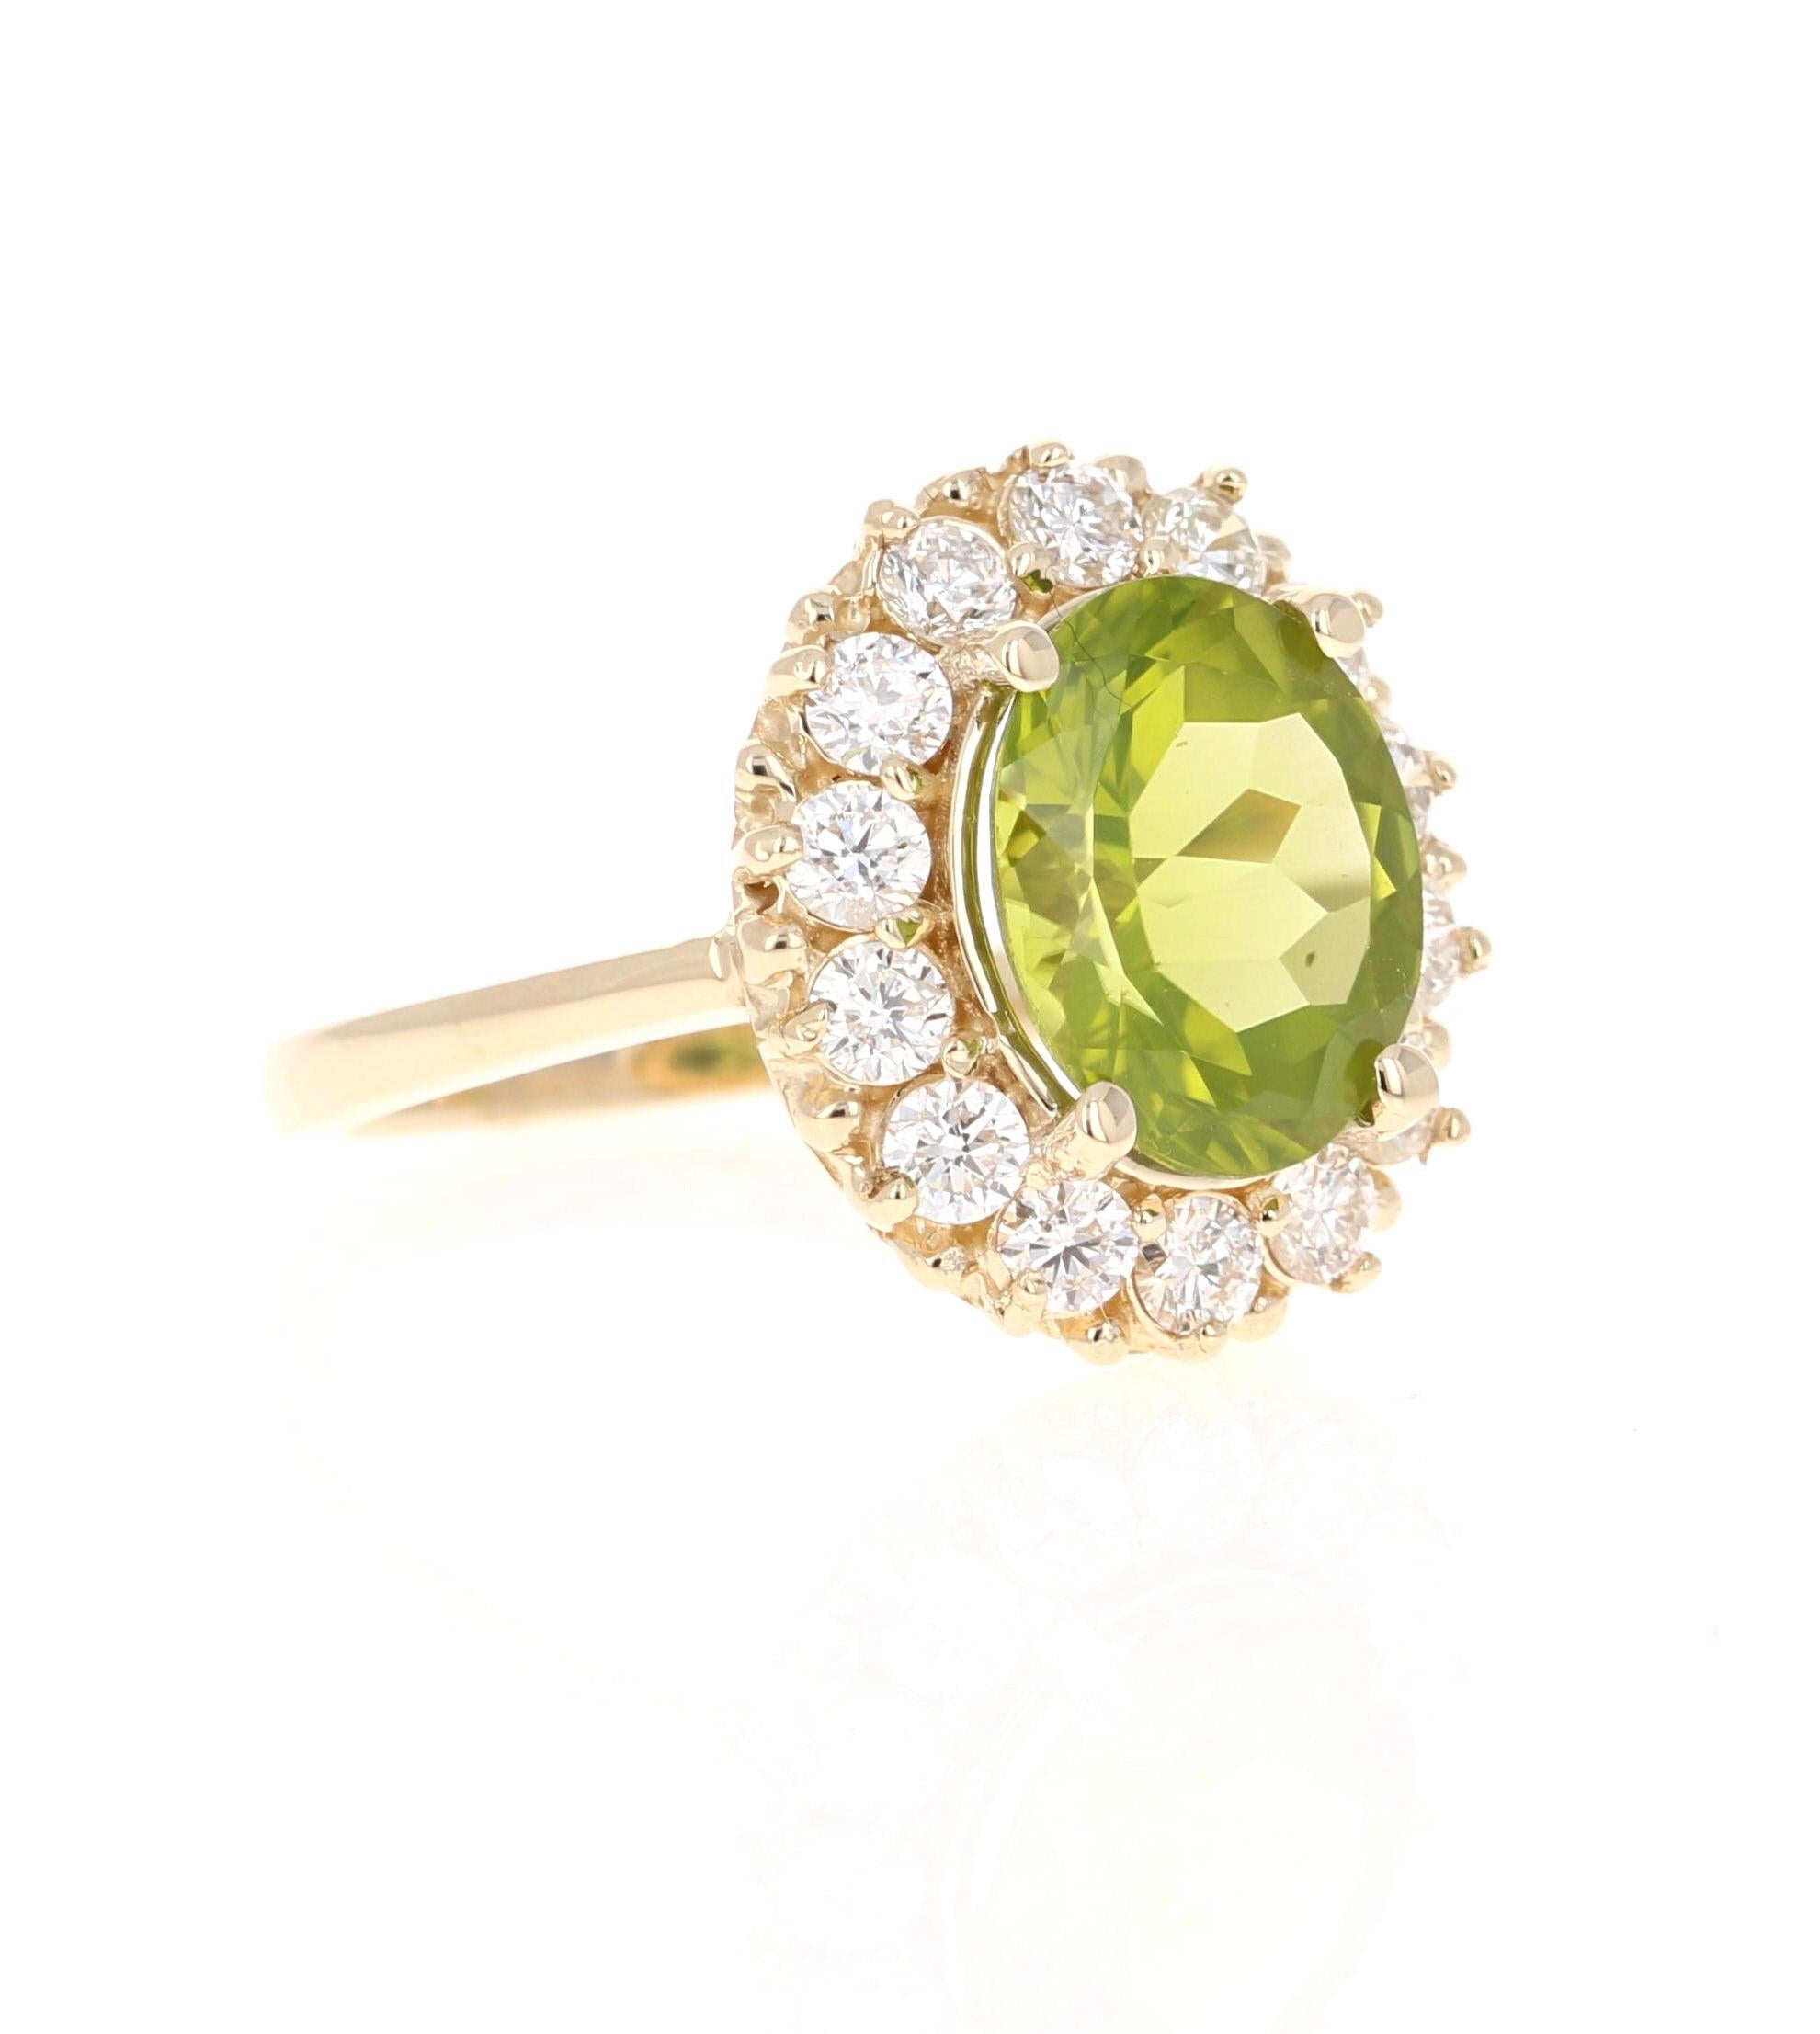 This Peridot and Diamond Ring has a 3.58 Carat Oval Cut Peridot set in the center and has 14 Round Cut Diamonds weighing 0.96 Carats.  The Clarity and Color of the diamonds is SI1/ F.
The total carat weight of the ring is 4.54 Carats. 

It is set in